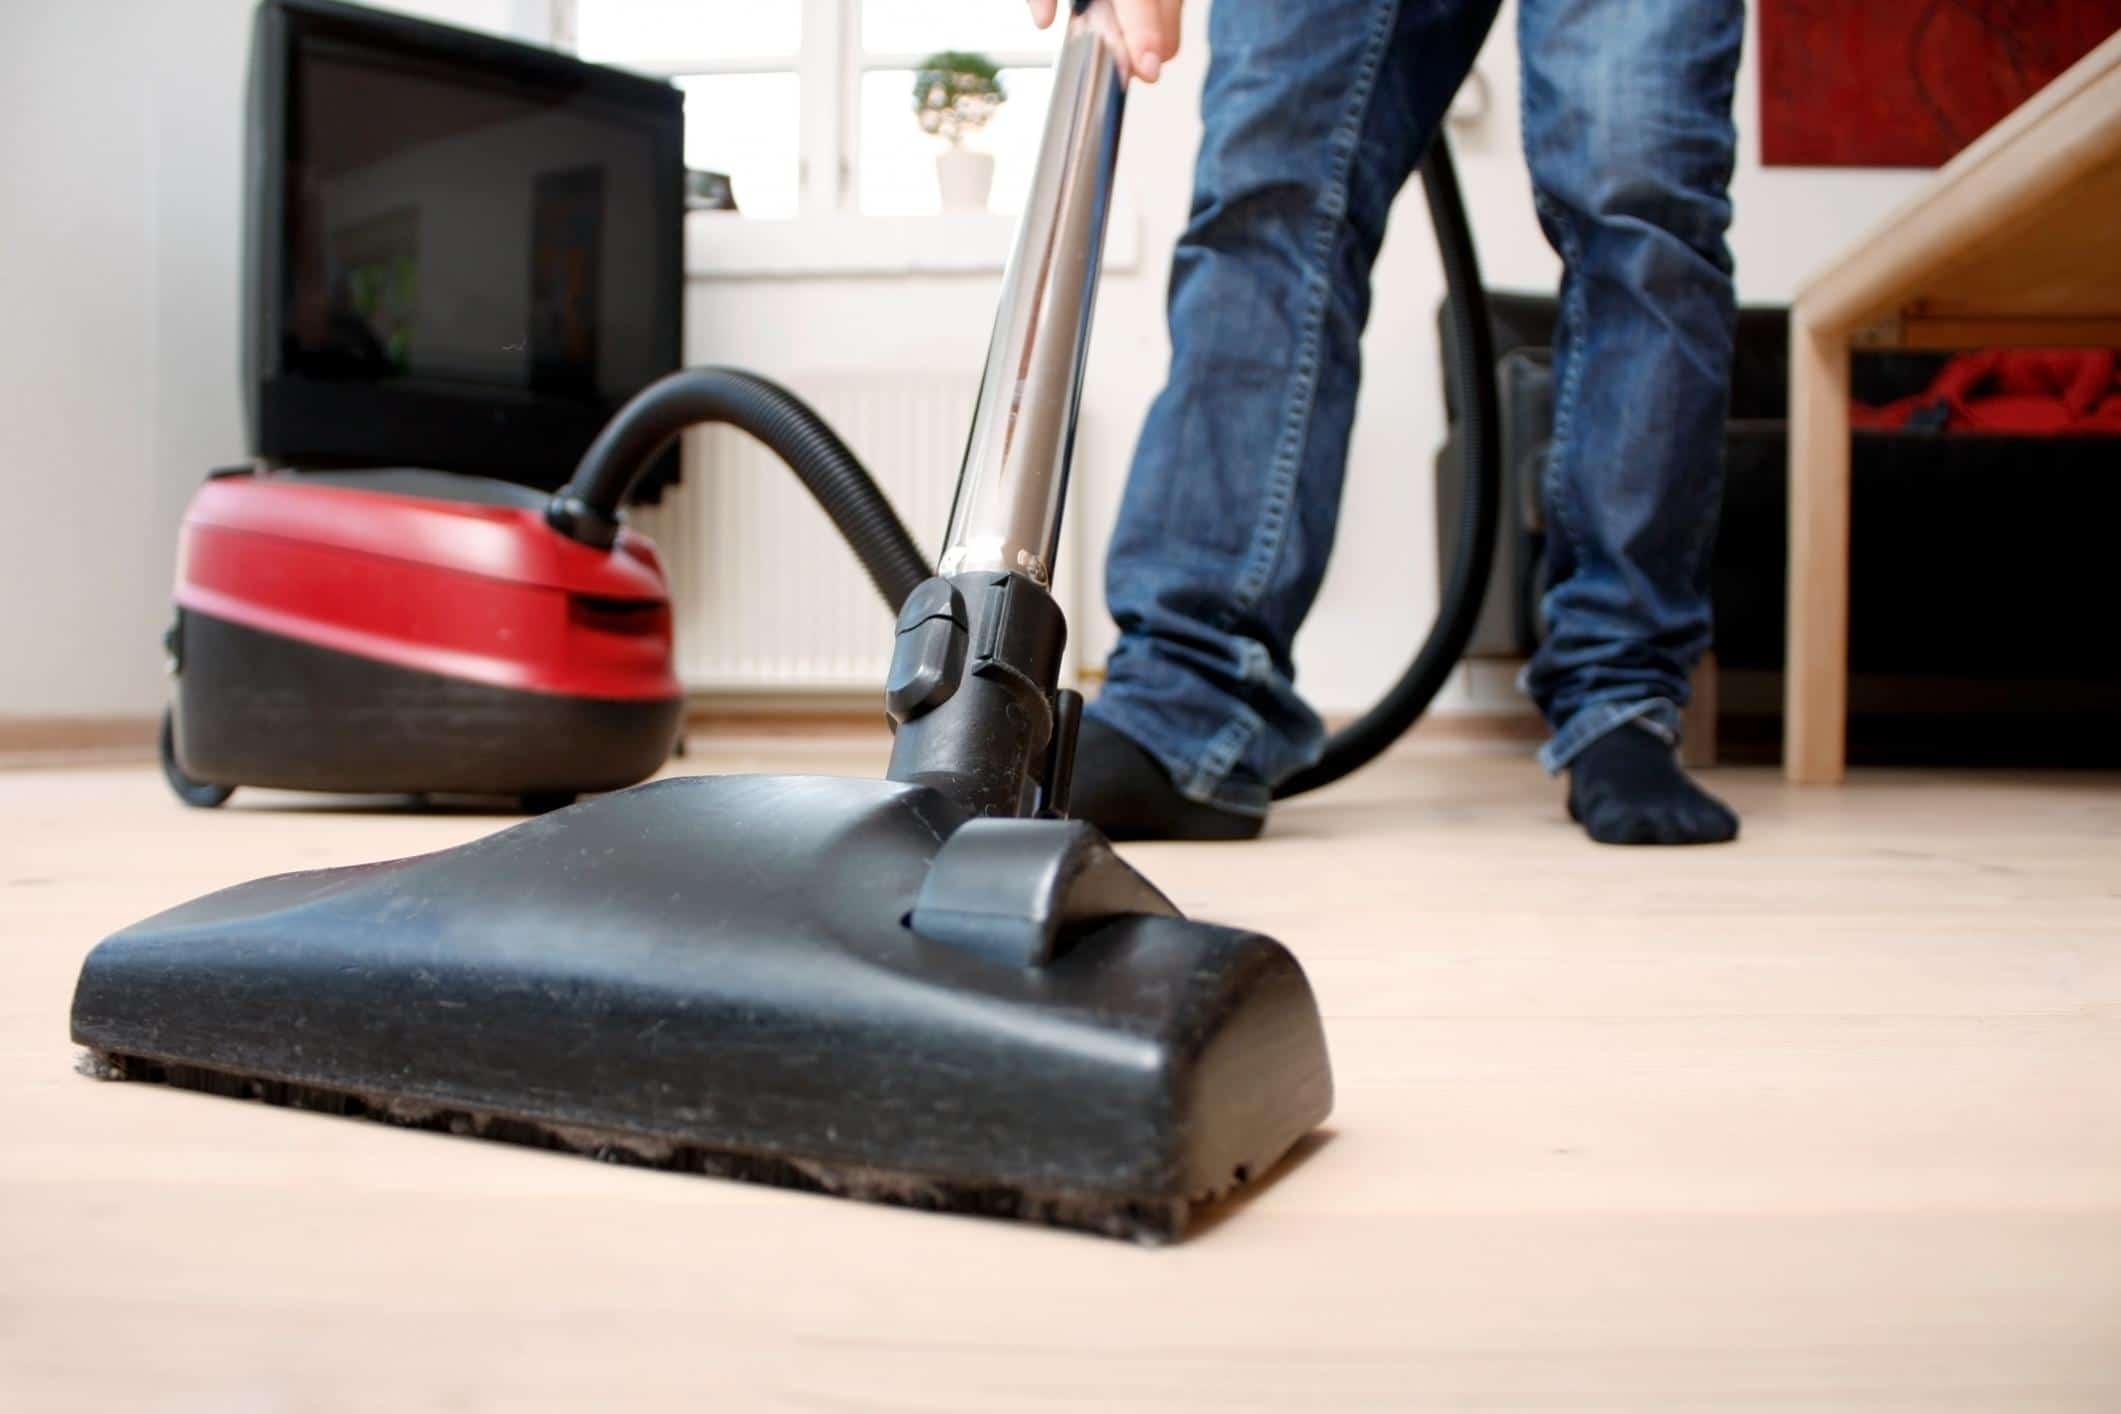 commercial carpet cleaning service in Calgary, AB